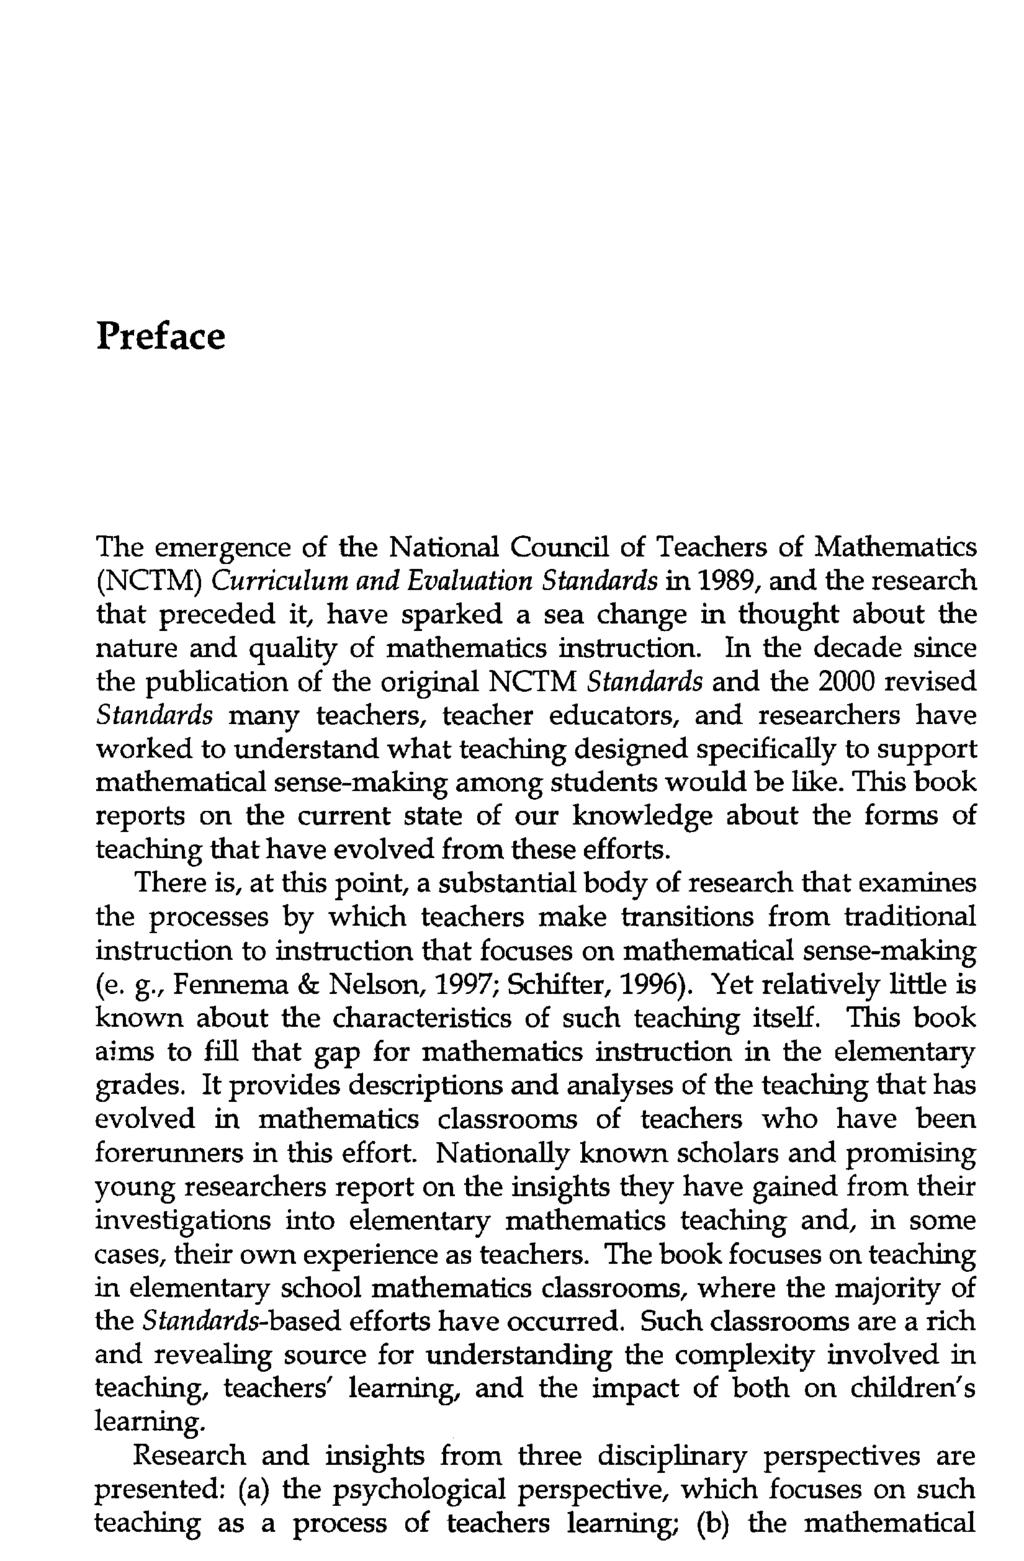 Preface The emergence of the National Council of Teachers of Mathematics (NCTM) Curriculum and Evaluation Standards in 1989, and the research that preceded it, have sparked a sea change in thought